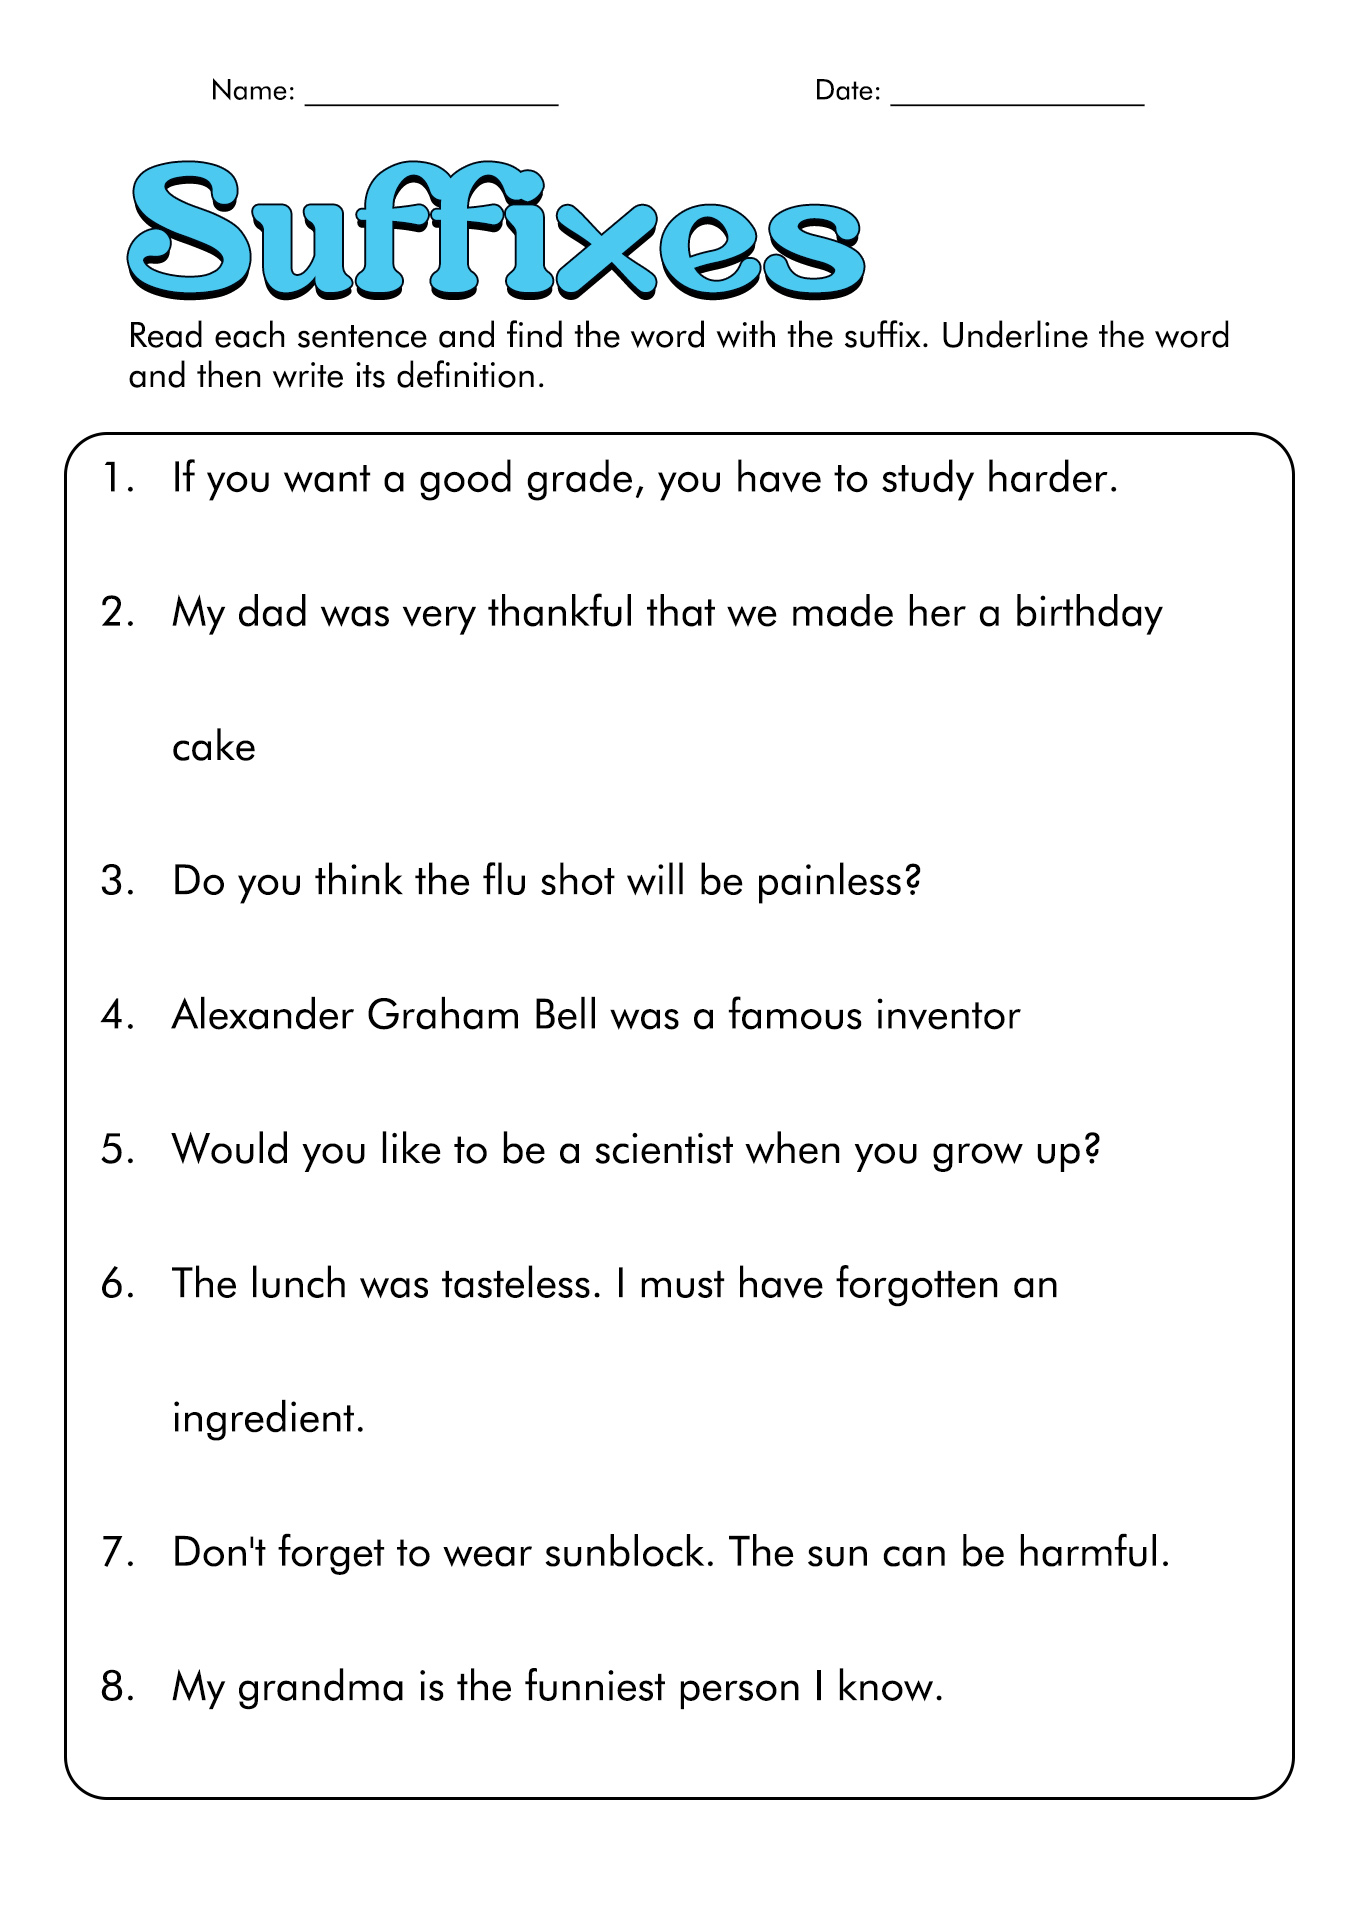 15-best-images-of-common-suffixes-worksheets-prefixes-and-suffixes